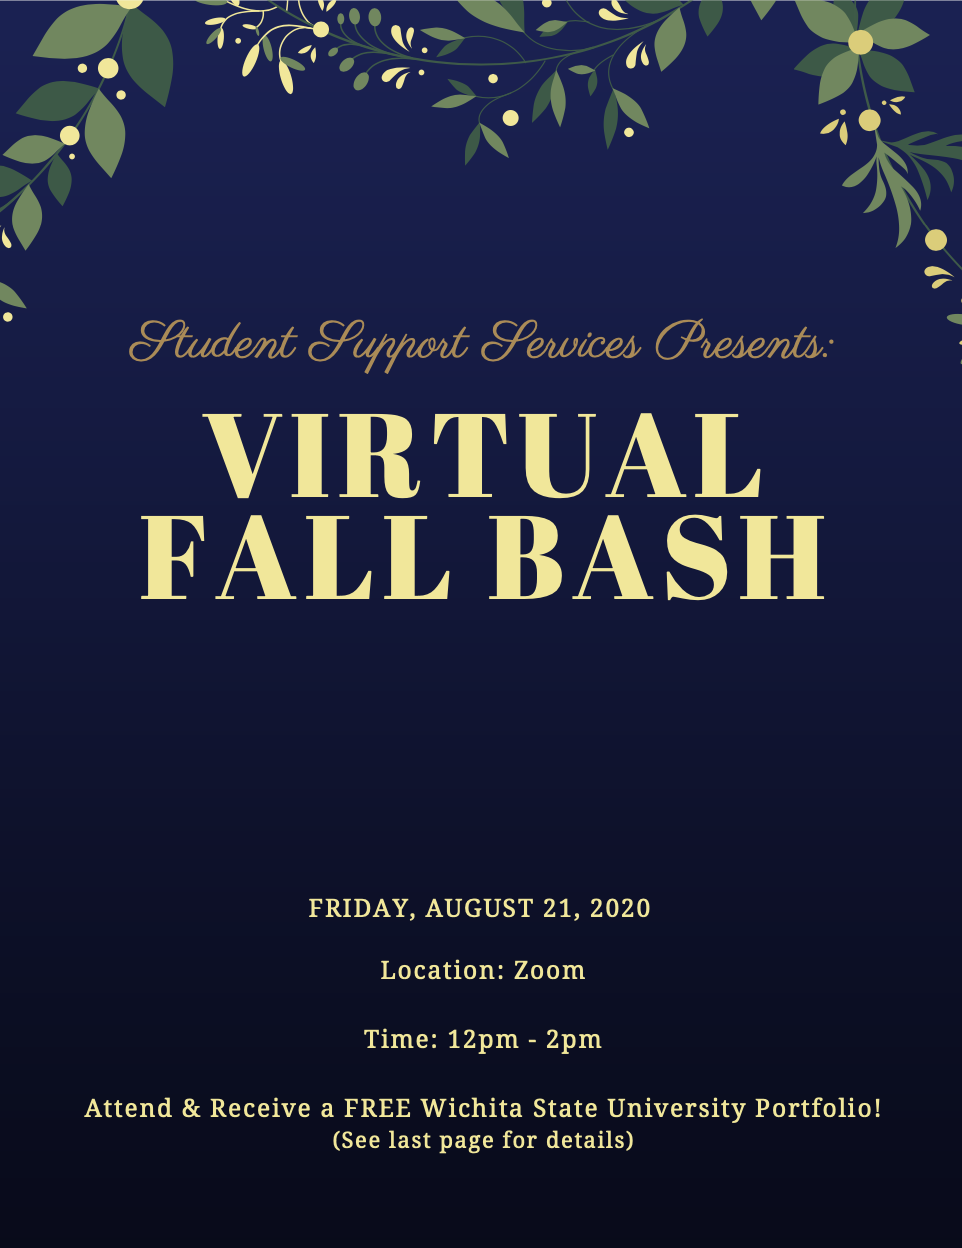 Student Support Services Presents: VIRTUAL FALL BASH; Friday, August 21, 2020; Location: Zoom; Time: 12PM to 2PM; Attend and Recieve a FREE Wichita State University Portfolio!